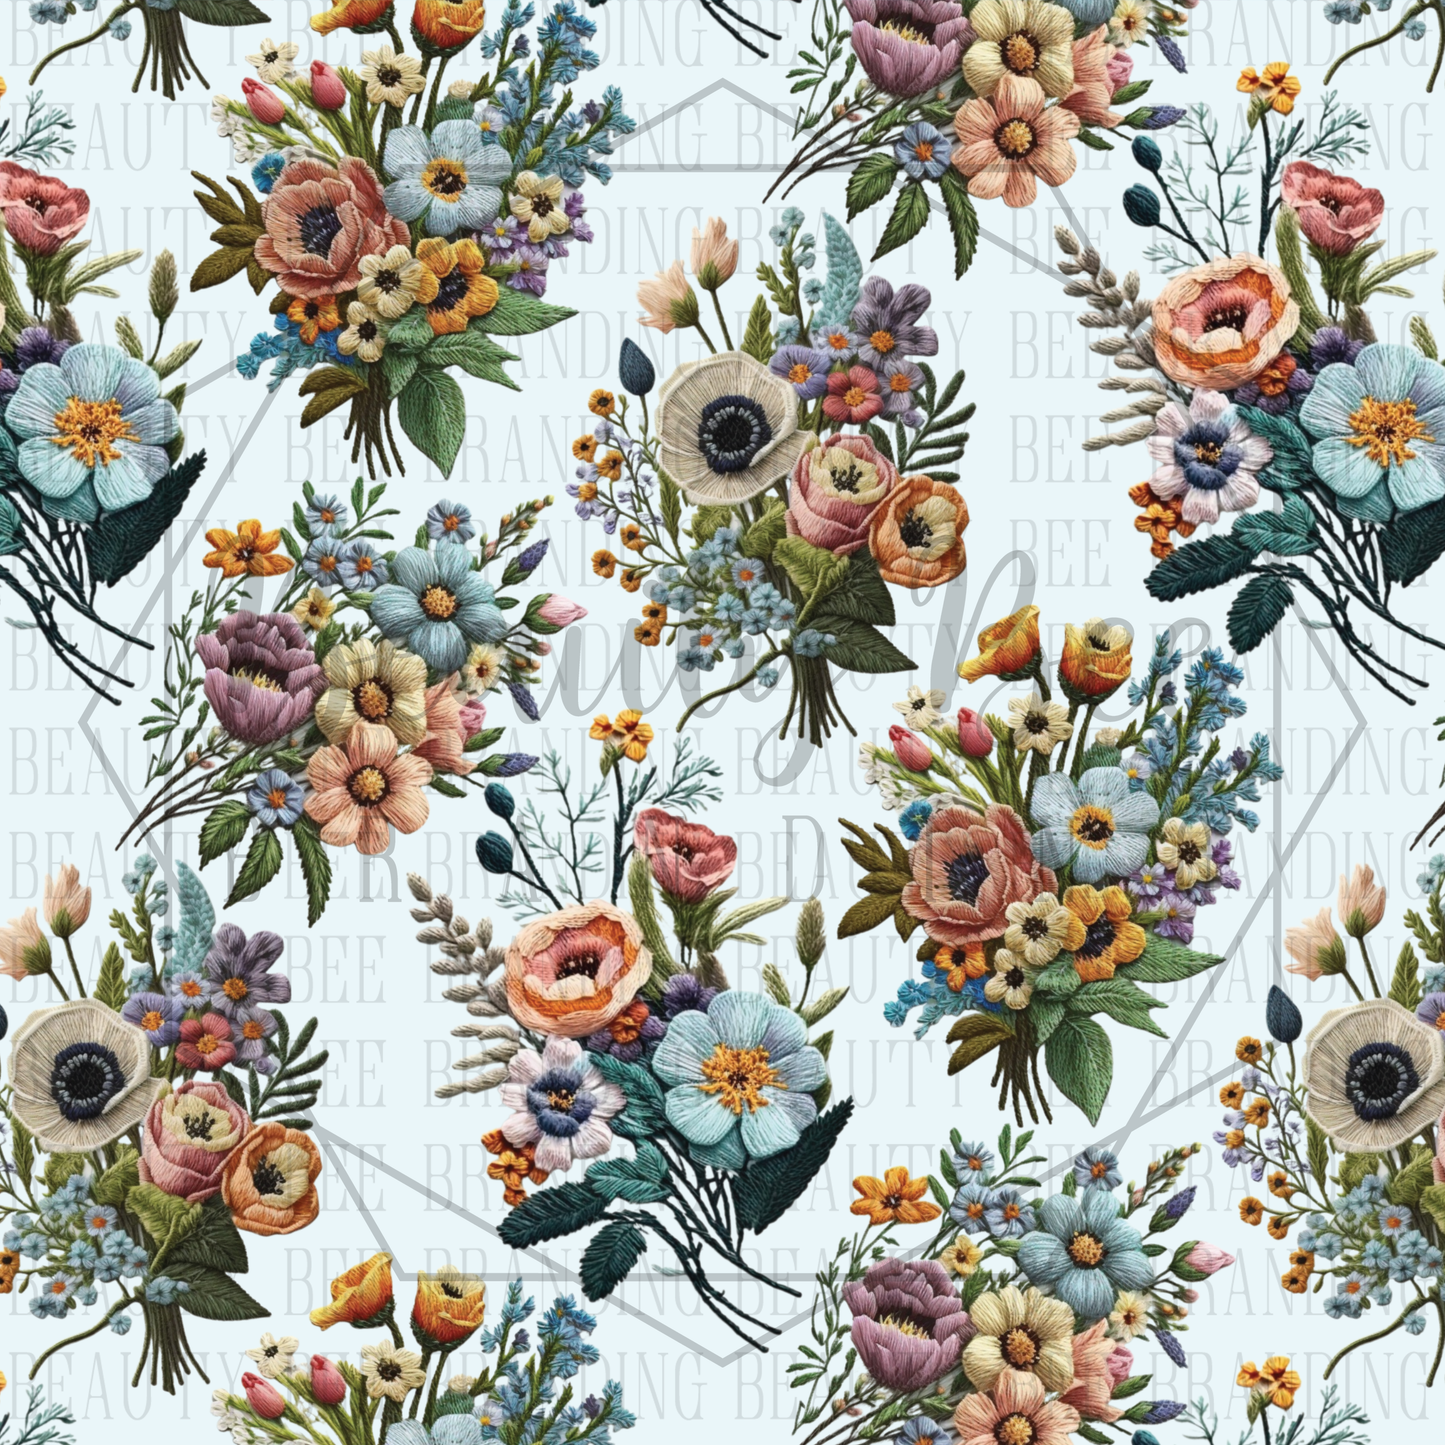 Floral Embroidered 1 SEAMLESS PATTERN